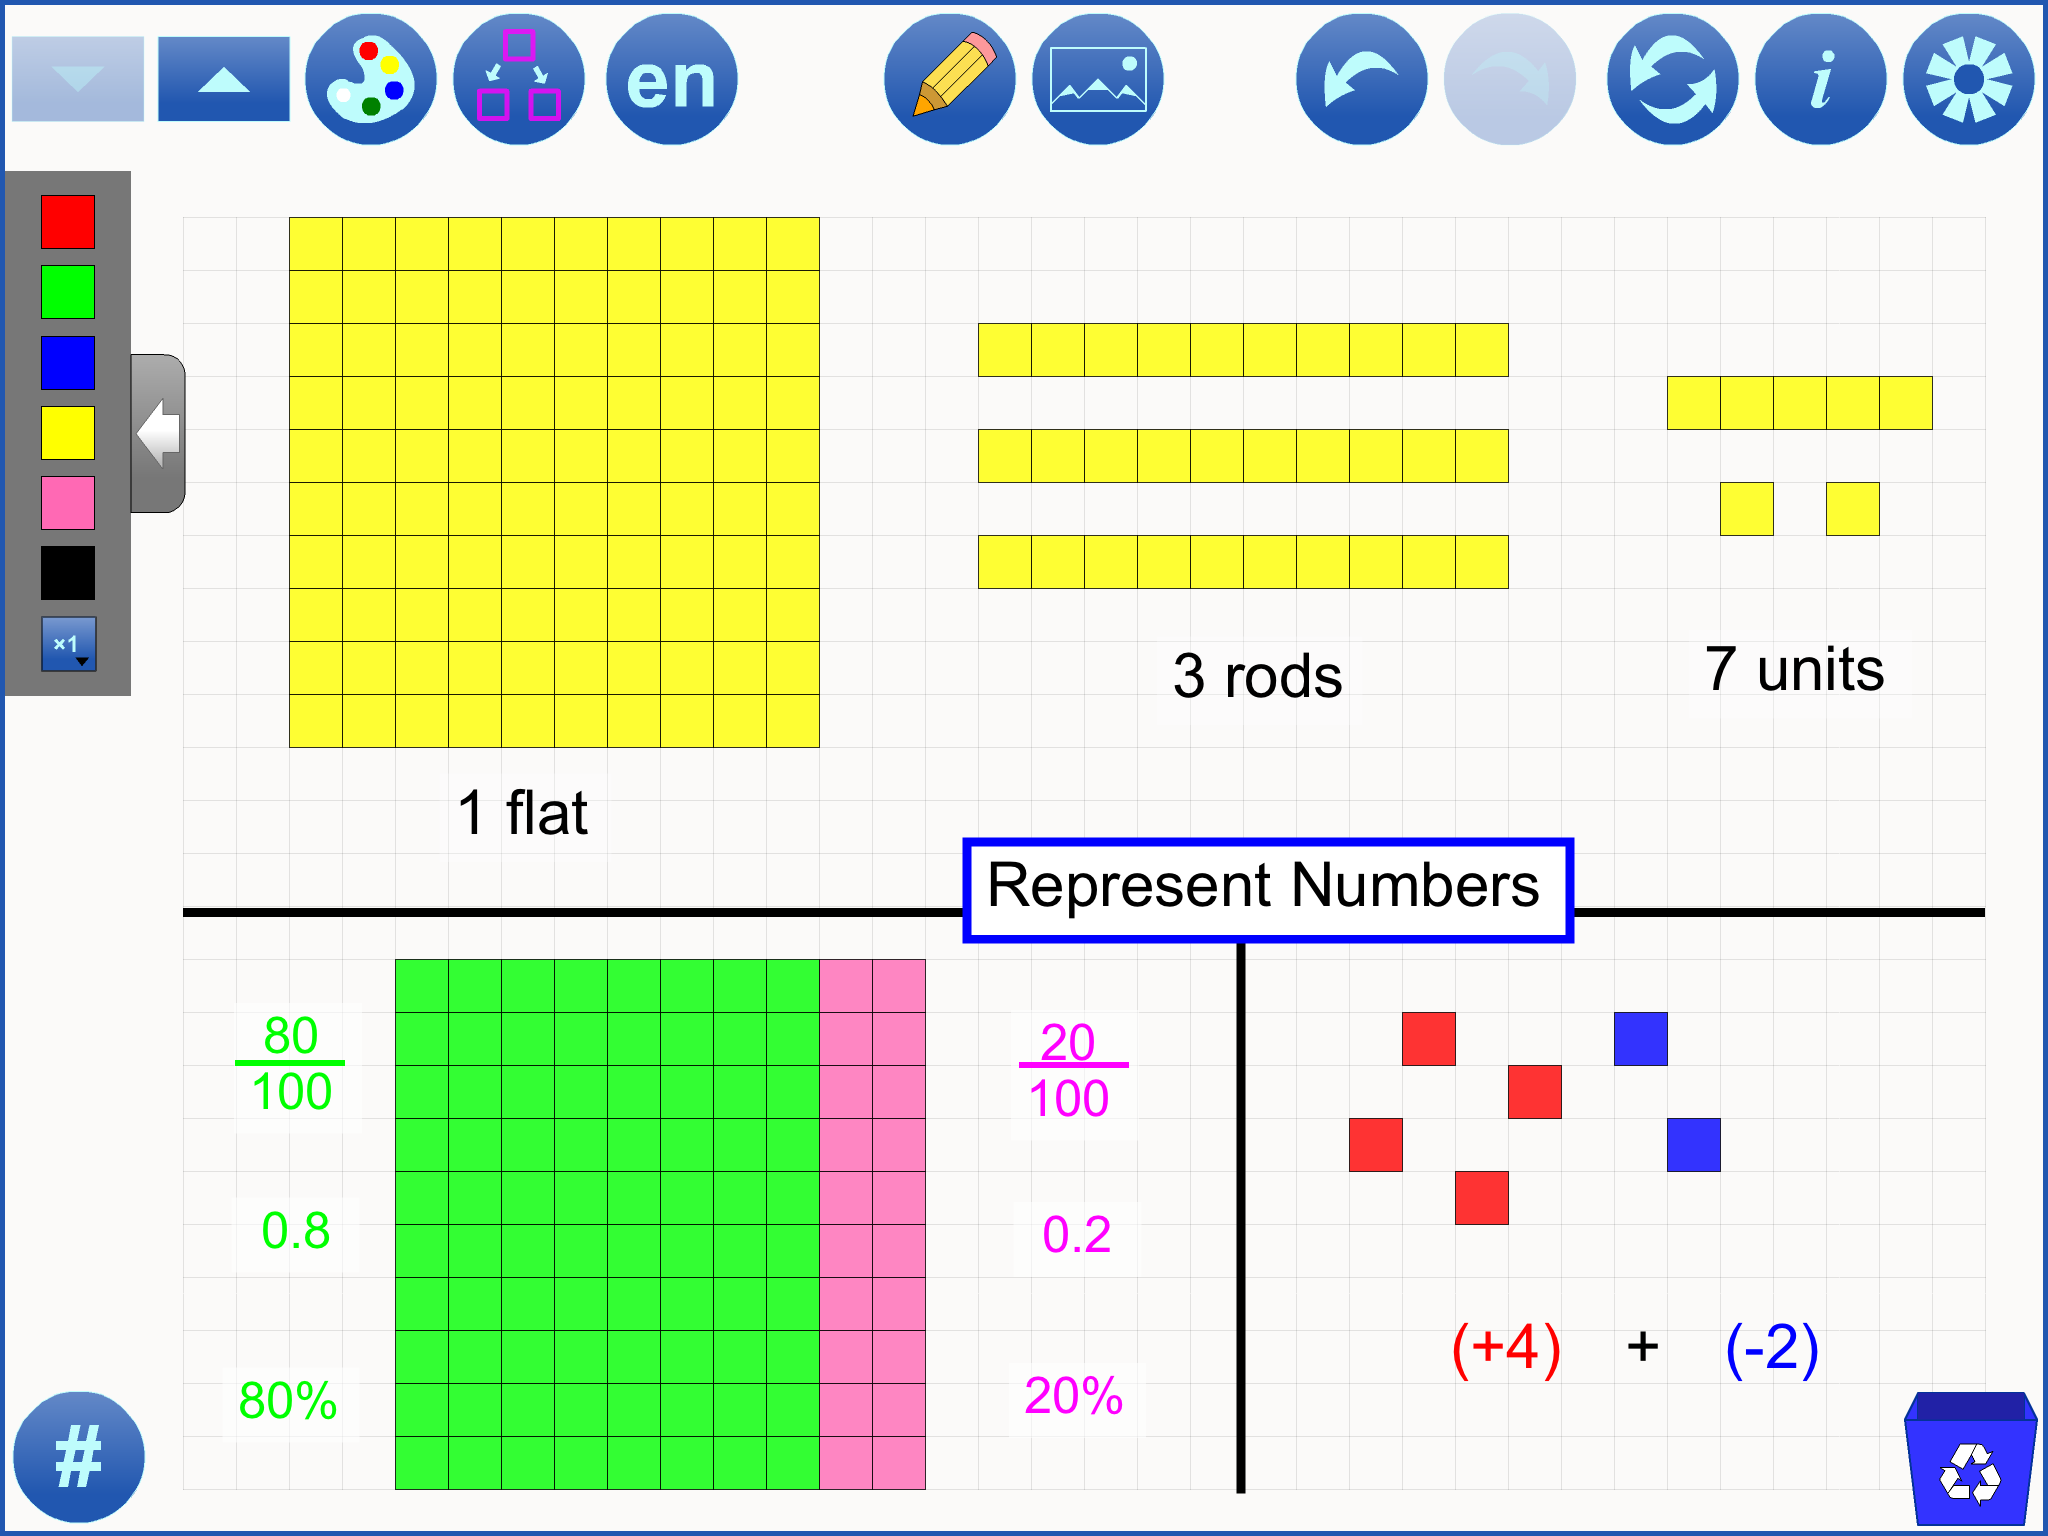 Represent various kinds of numbers